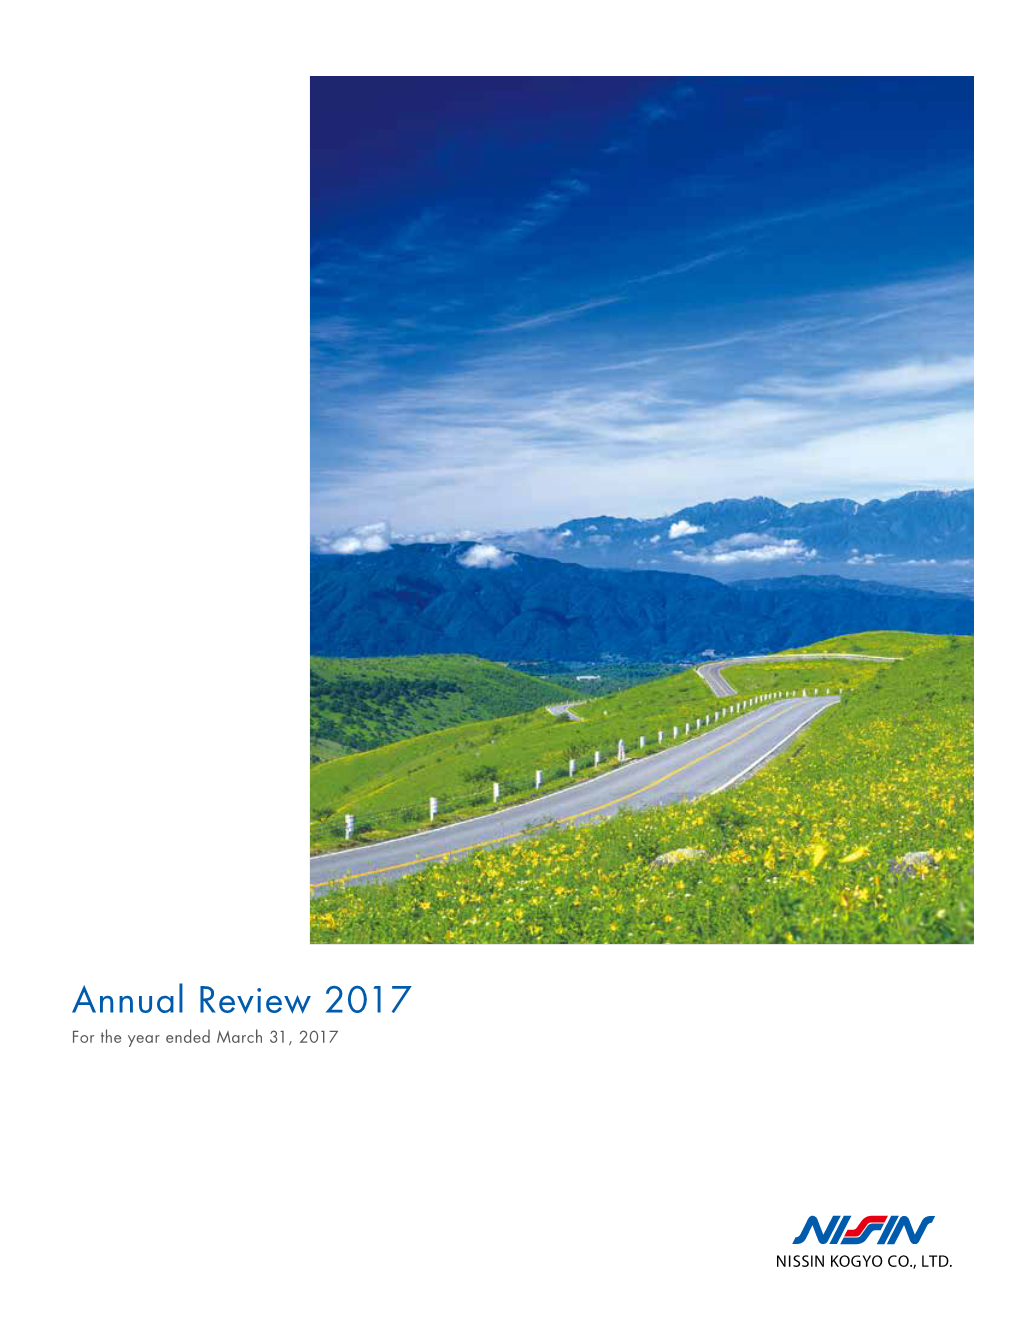 Annual Review 2017 for the Year Ended March 31, 2017